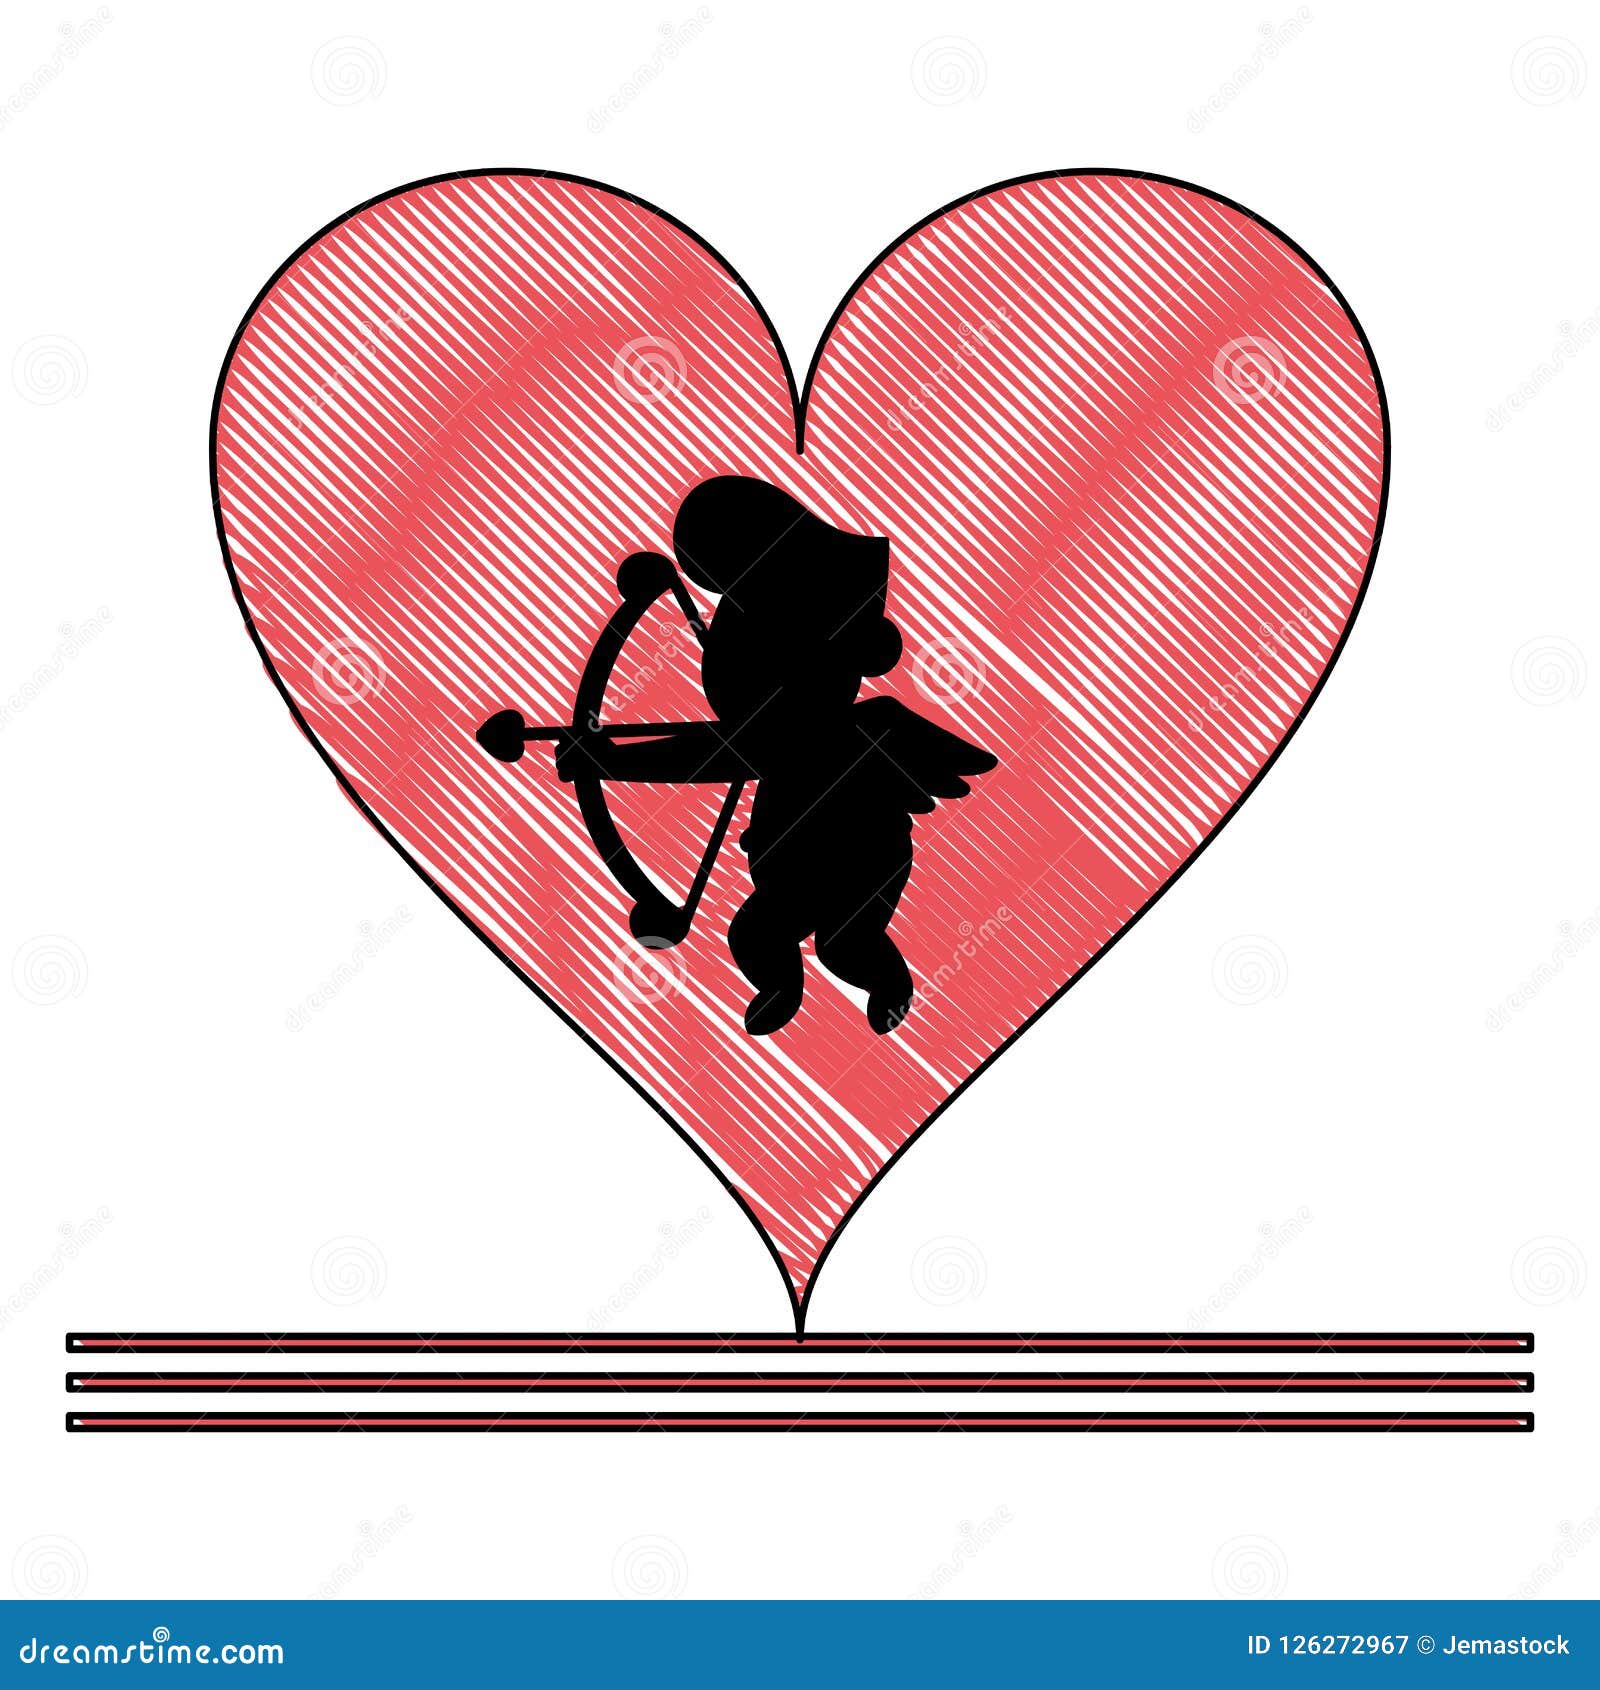 Download Cupid Silhouette On Heart Scribble Stock Vector ...